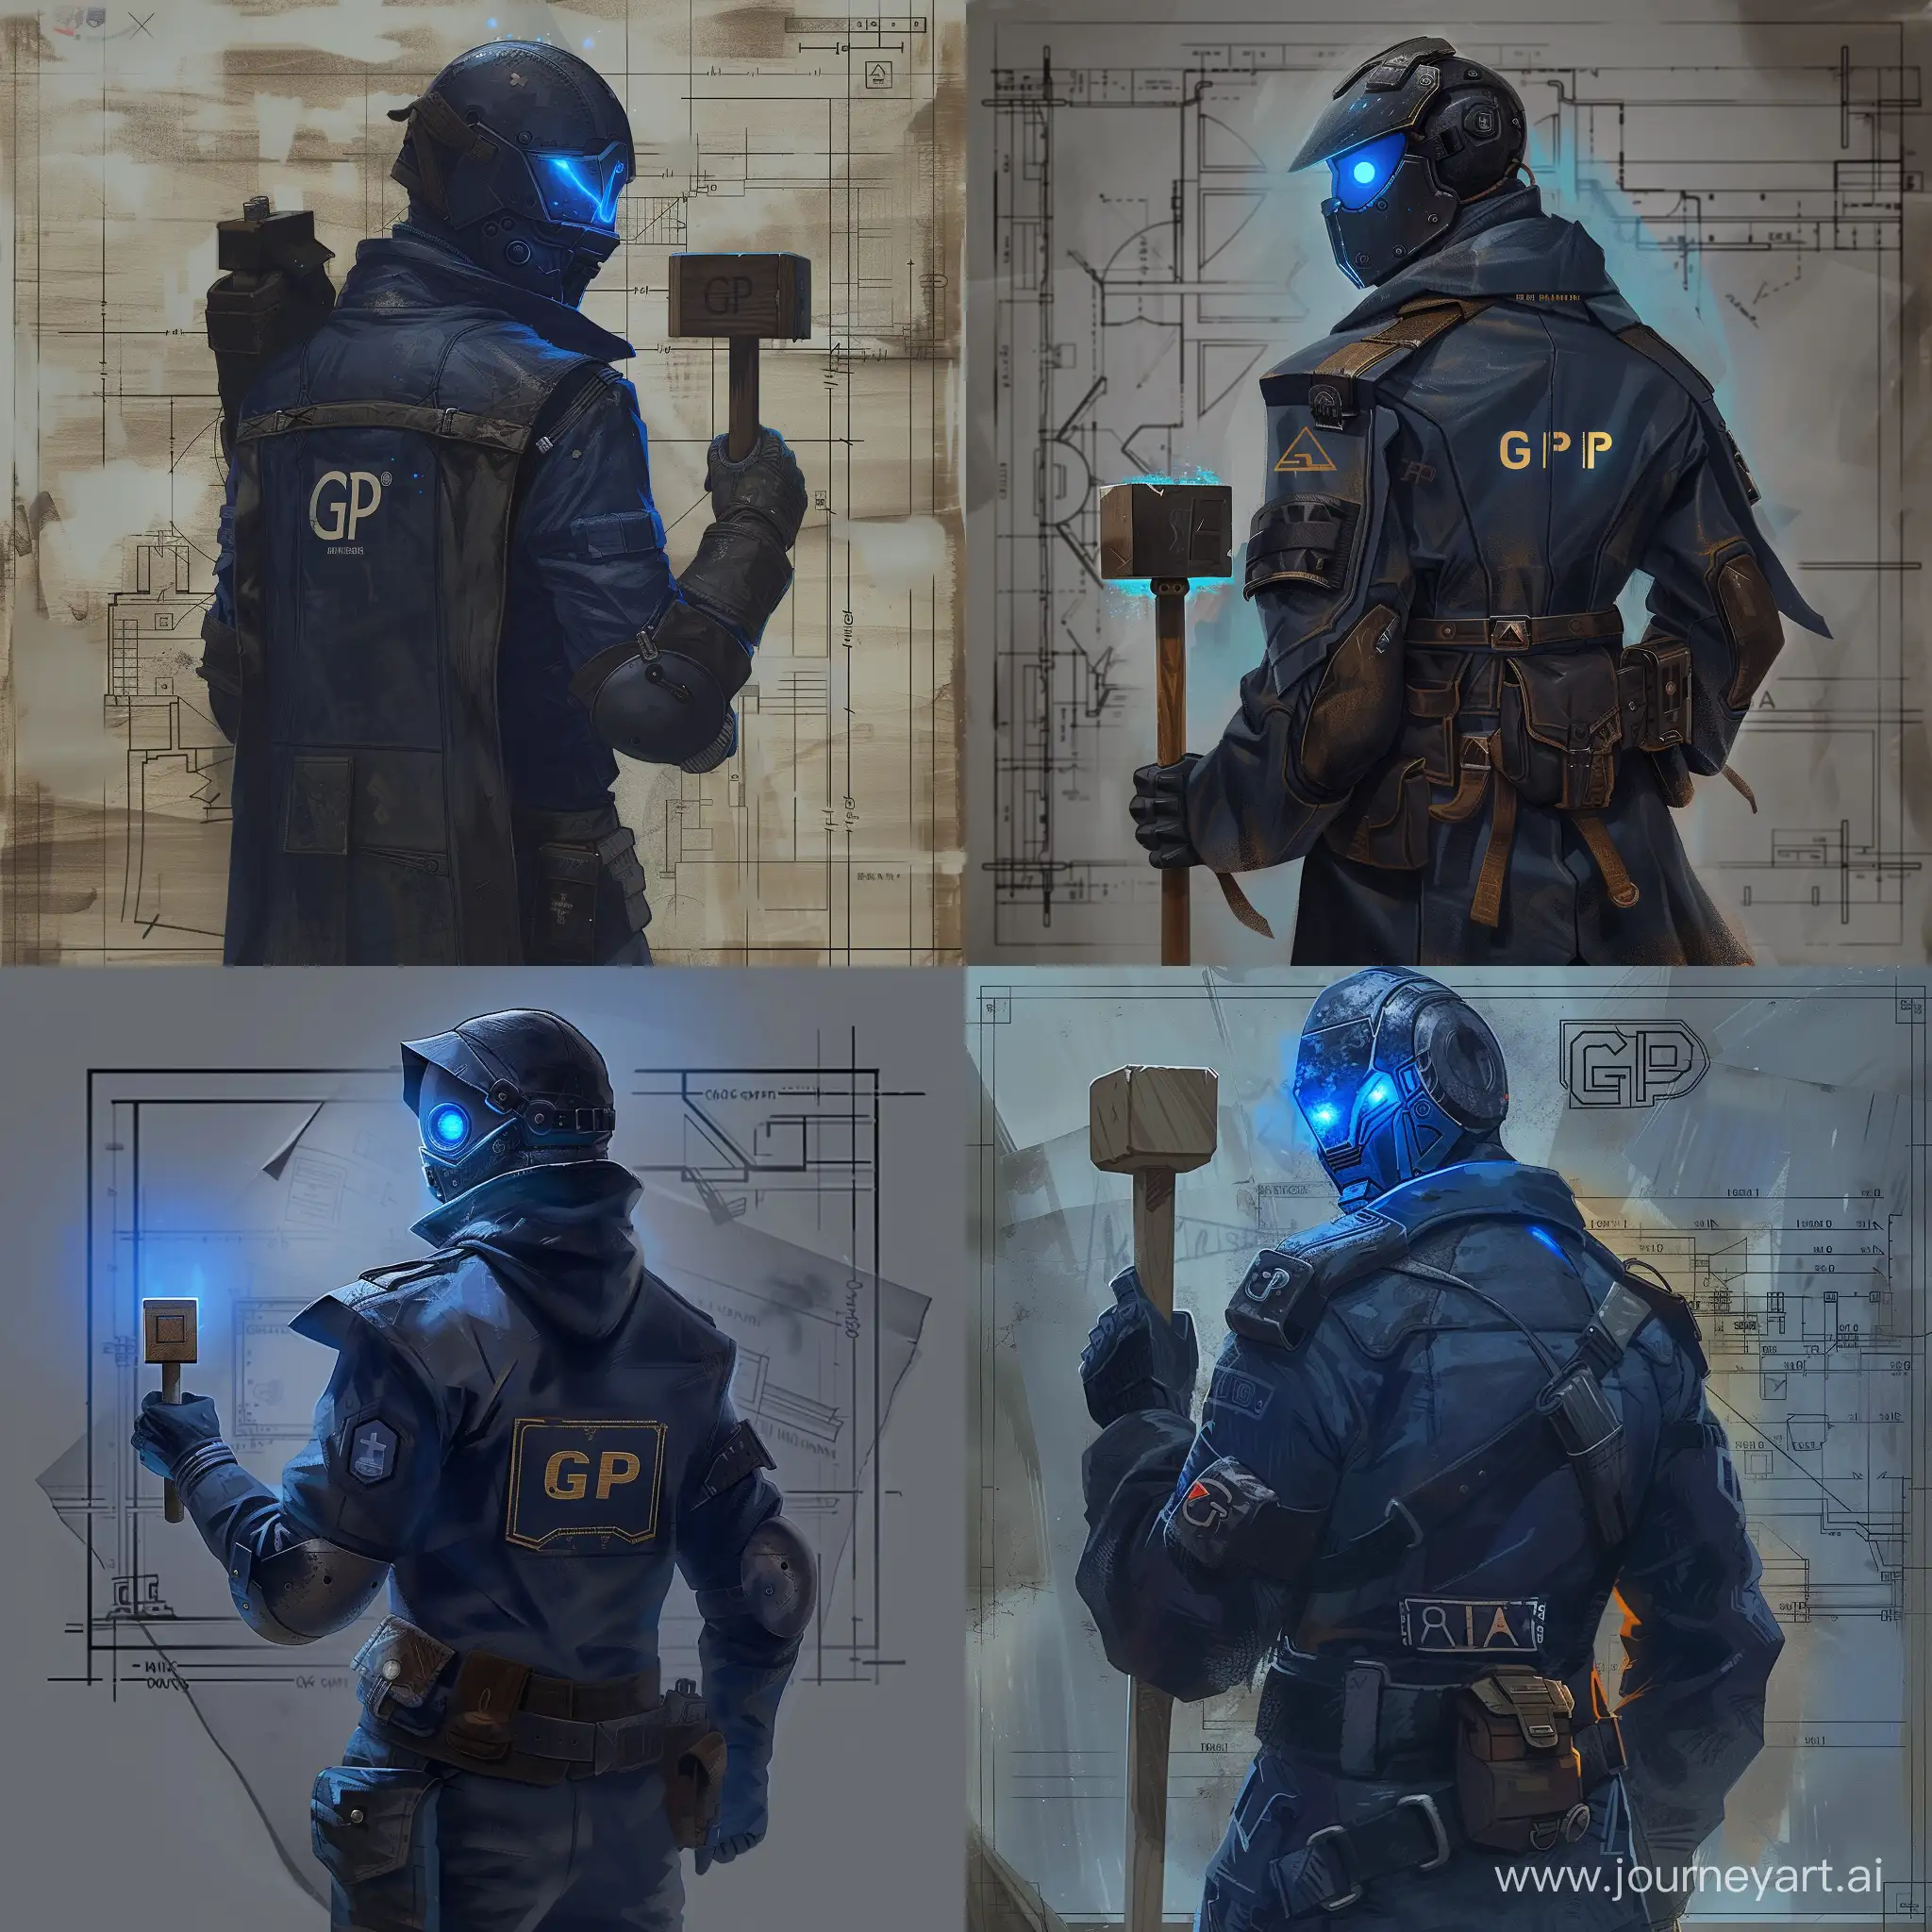 Mysterious-Figure-in-DarkBlue-Uniform-with-Glowing-Eyes-and-Blueprint